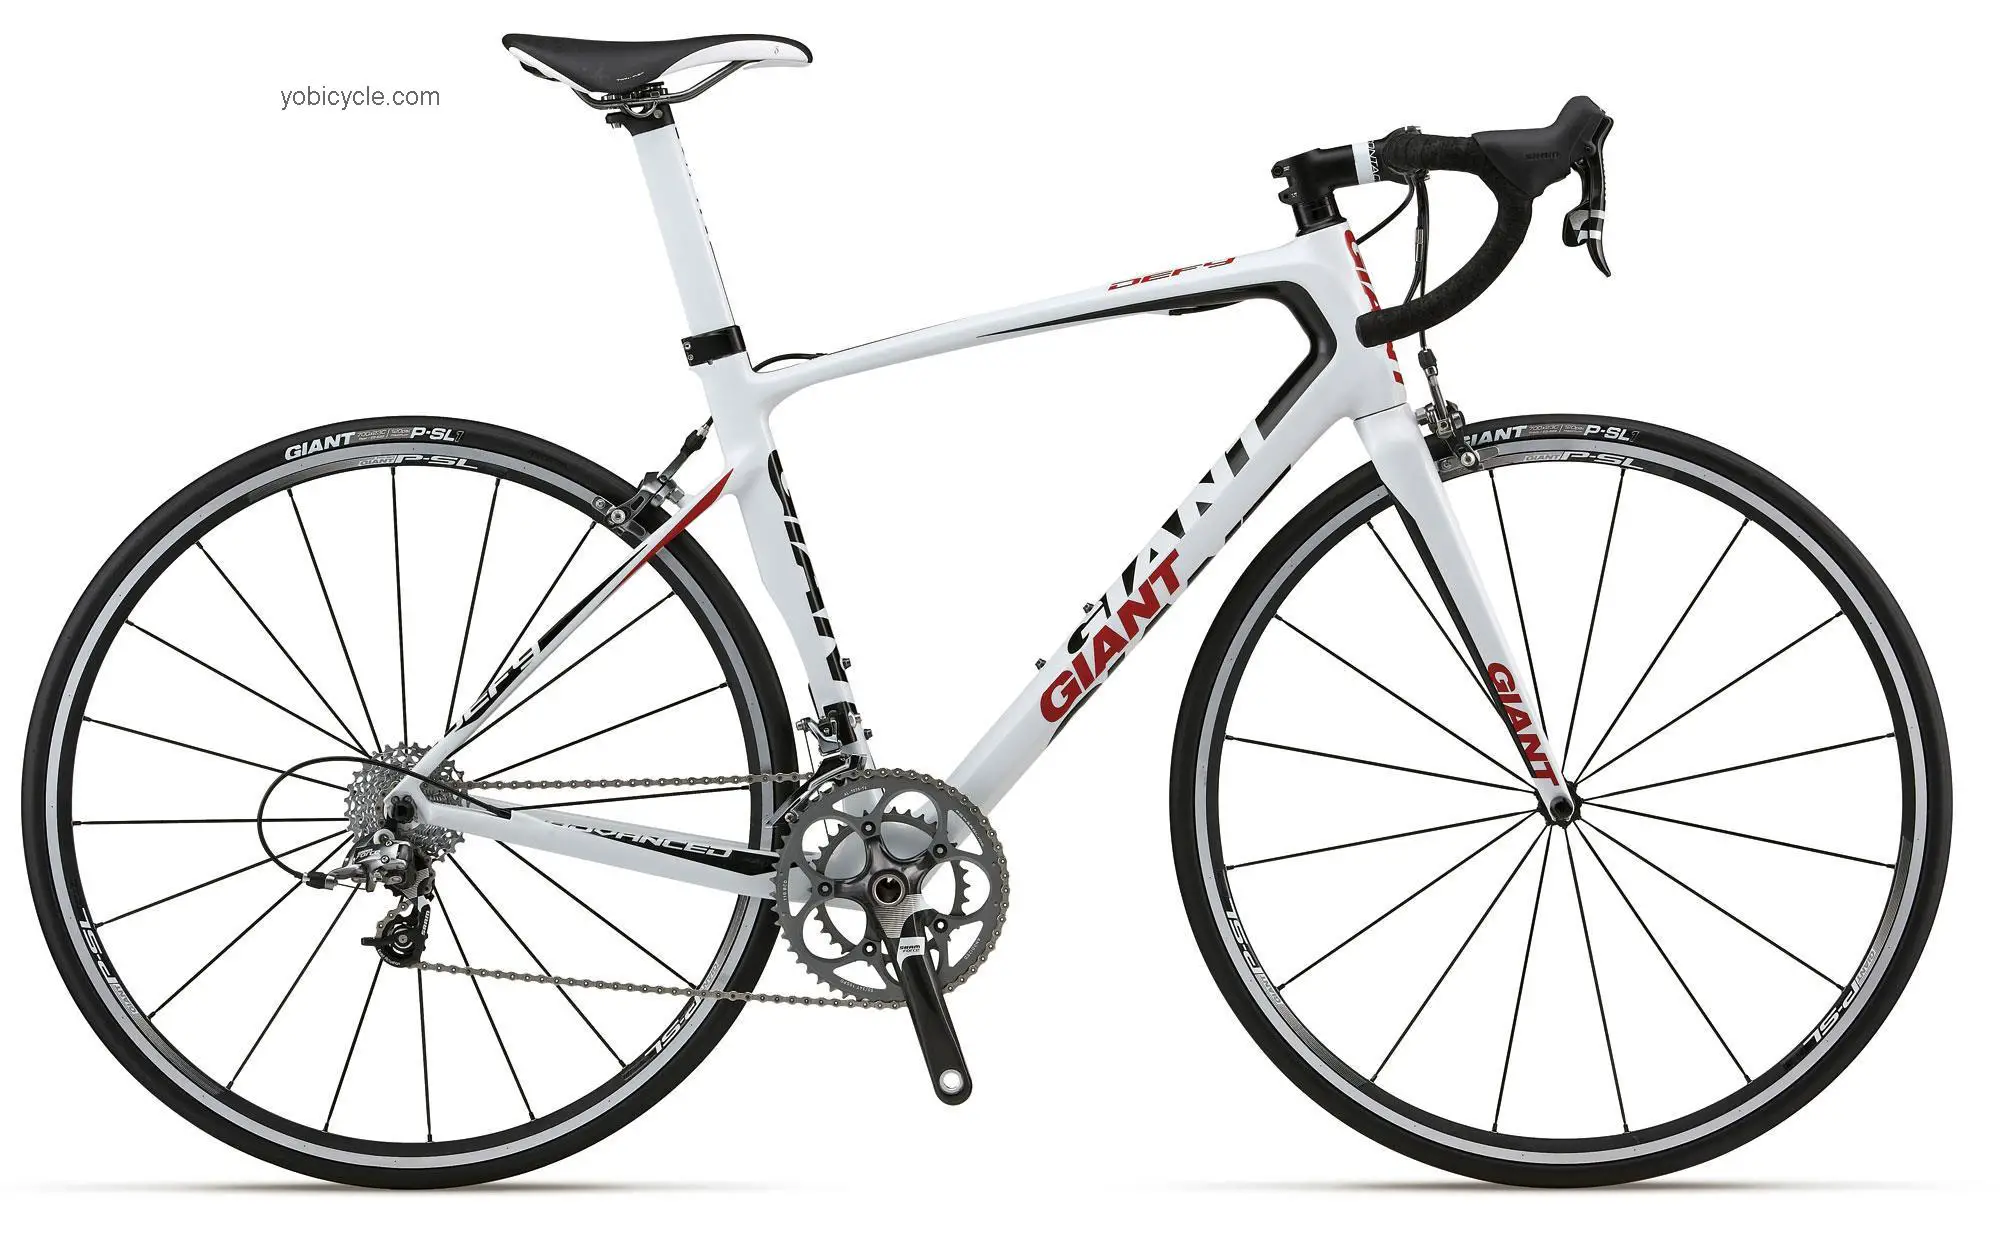 Giant Defy Advanced 1 2012 comparison online with competitors